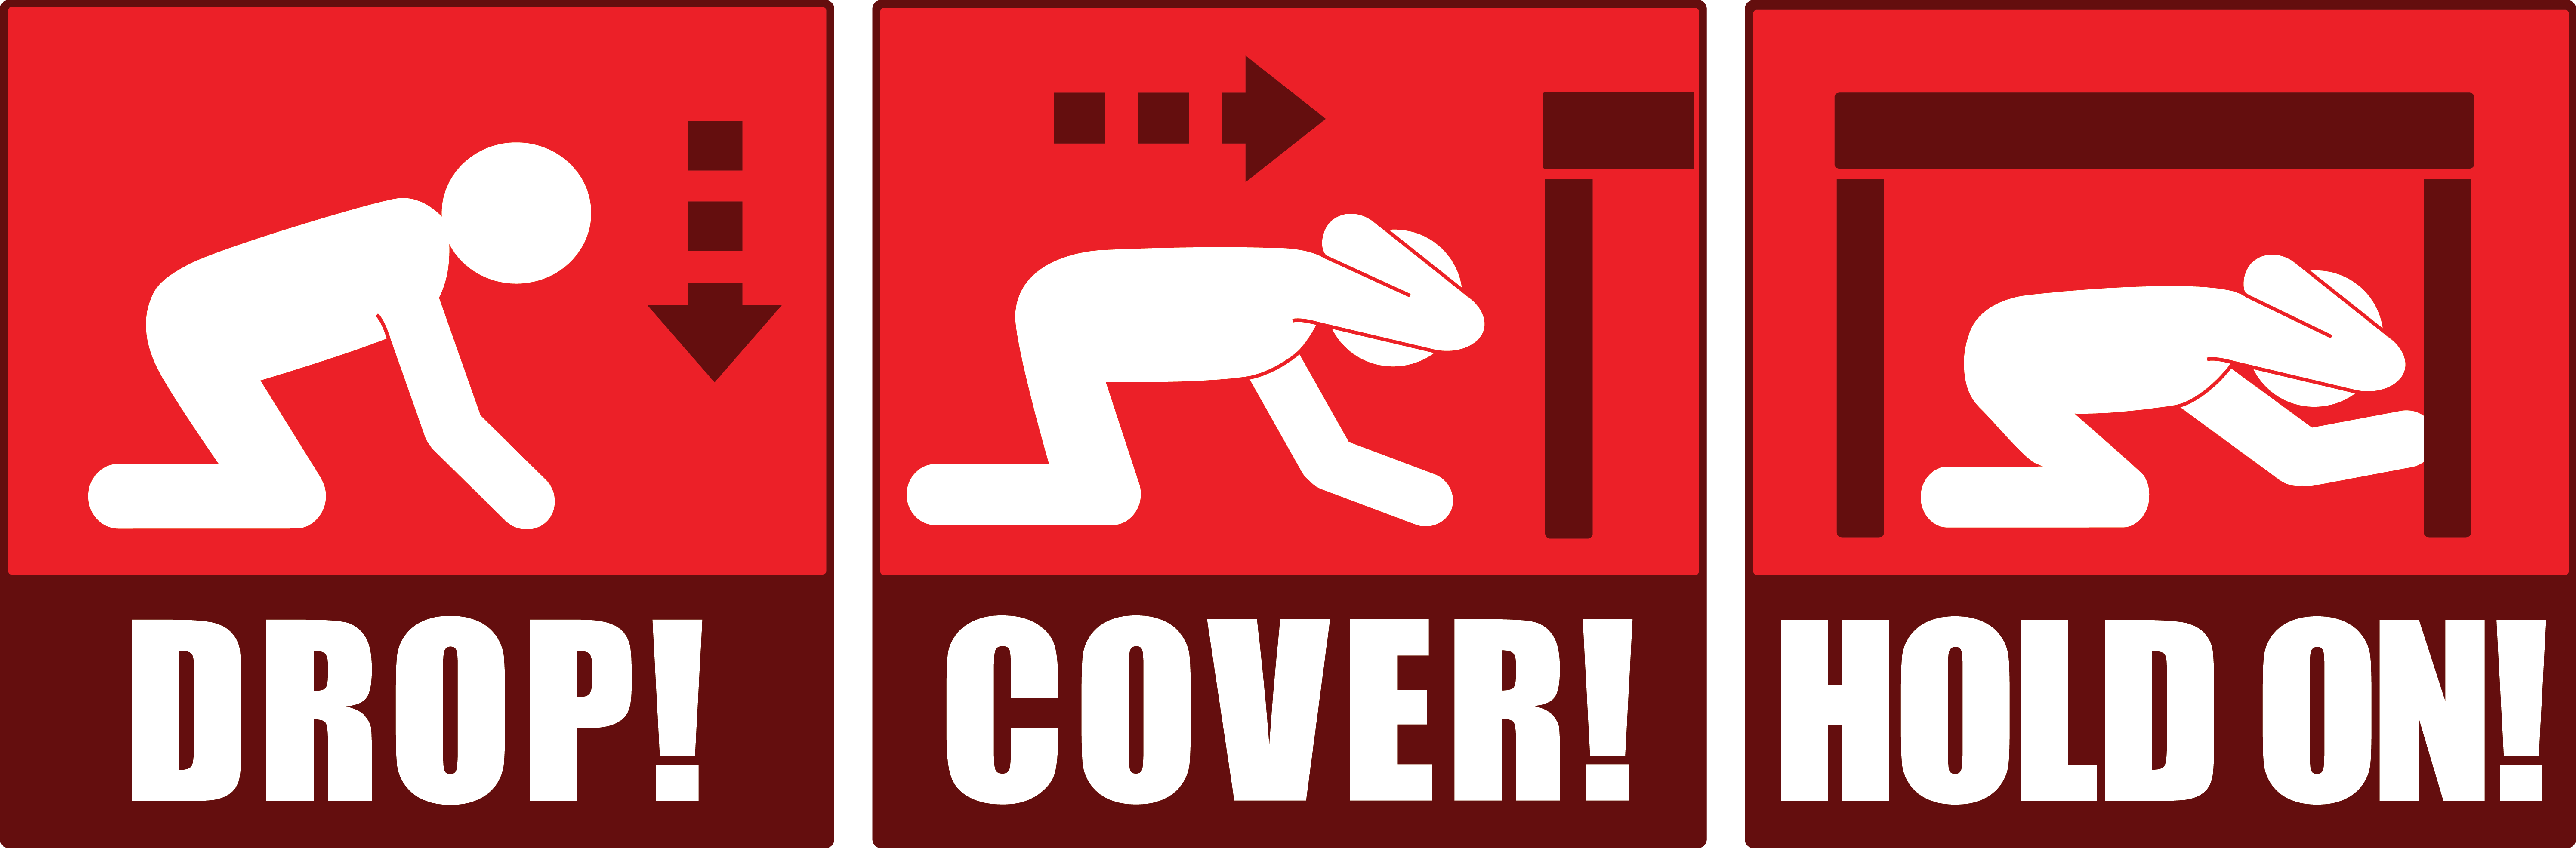 Great ShakeOut Earthquake Drills - ShakeOut Graphics